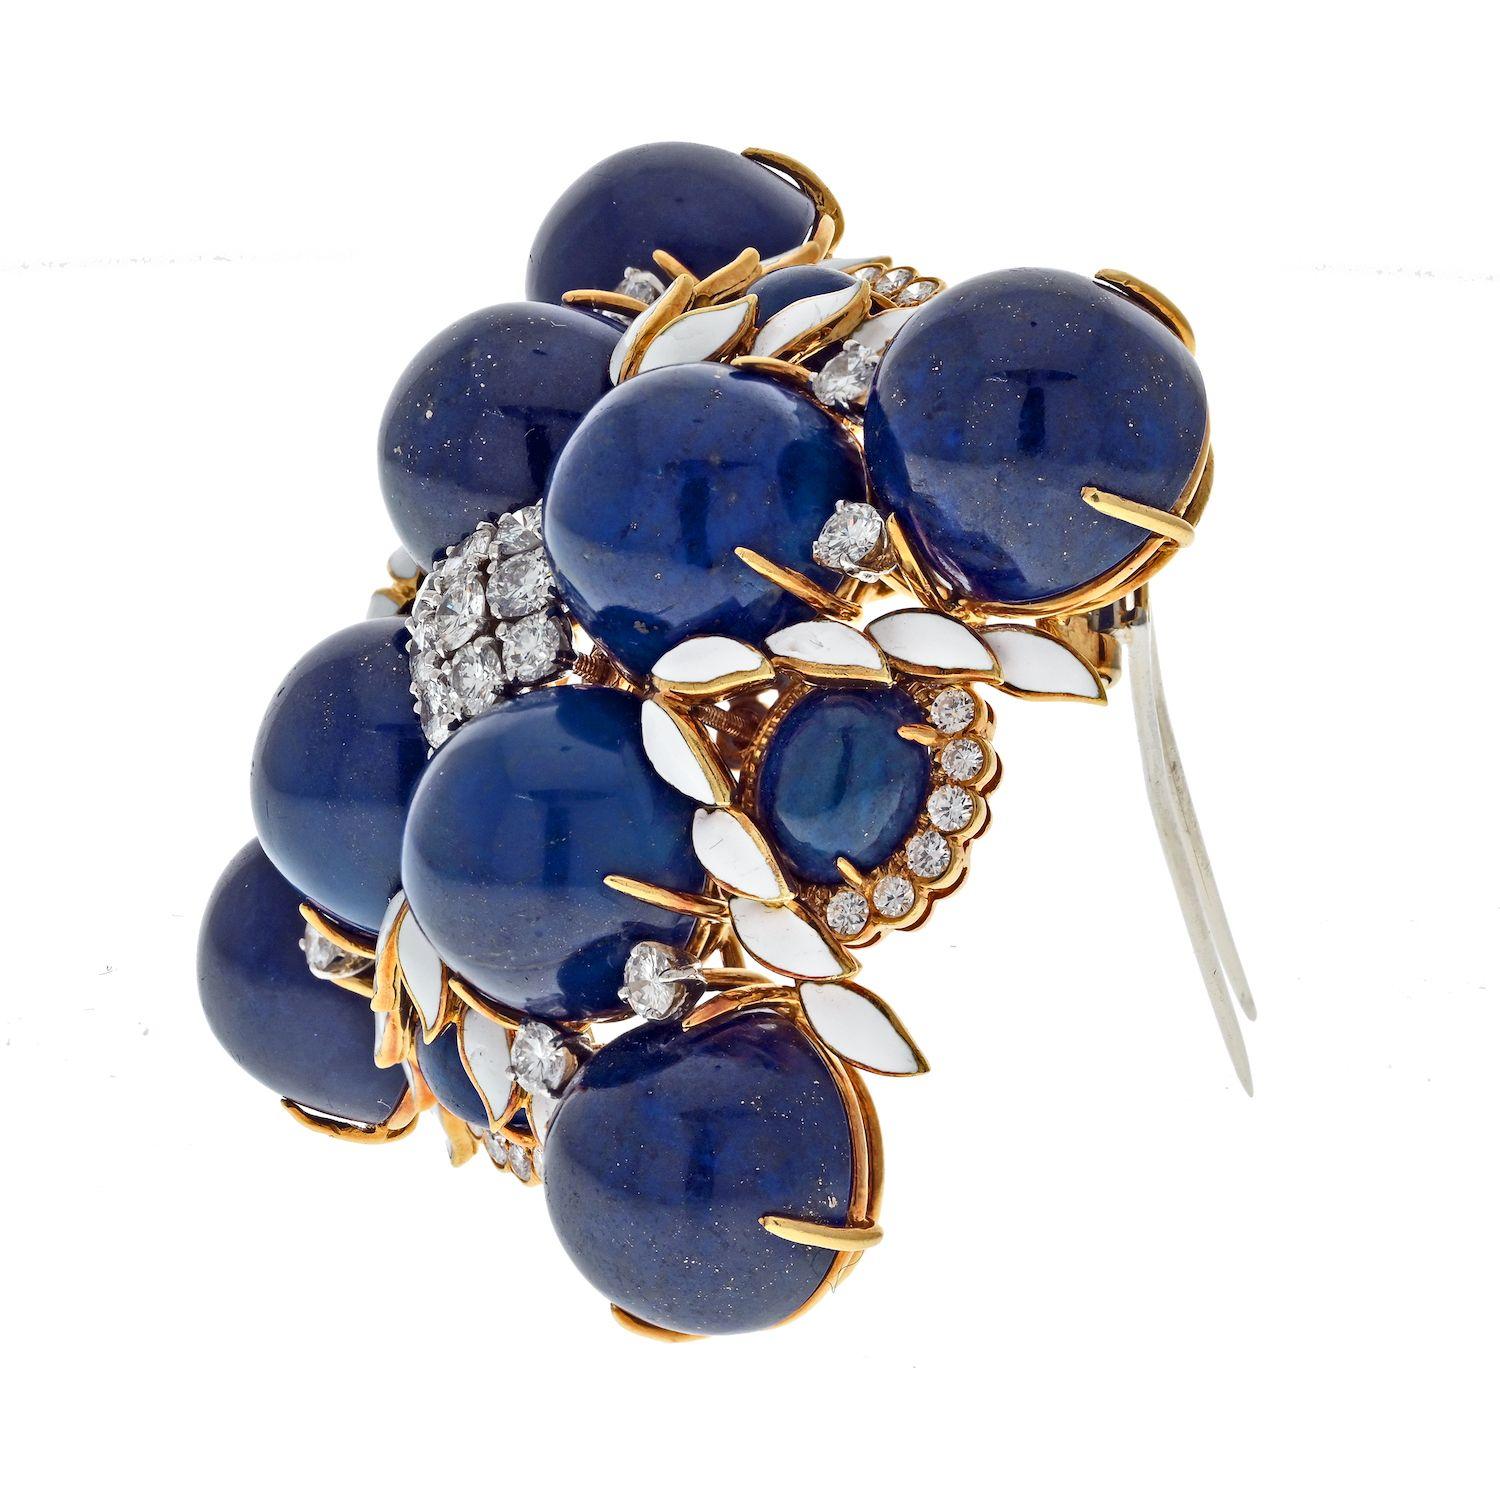 The David Webb Platinum & 18K Yellow Gold 1960's Lapis, White Enamel and Diamond Maltese Cross Style Brooch is a remarkable piece of jewelry that captures the essence of David Webb's iconic style. Crafted in a combination of platinum and 18K yellow